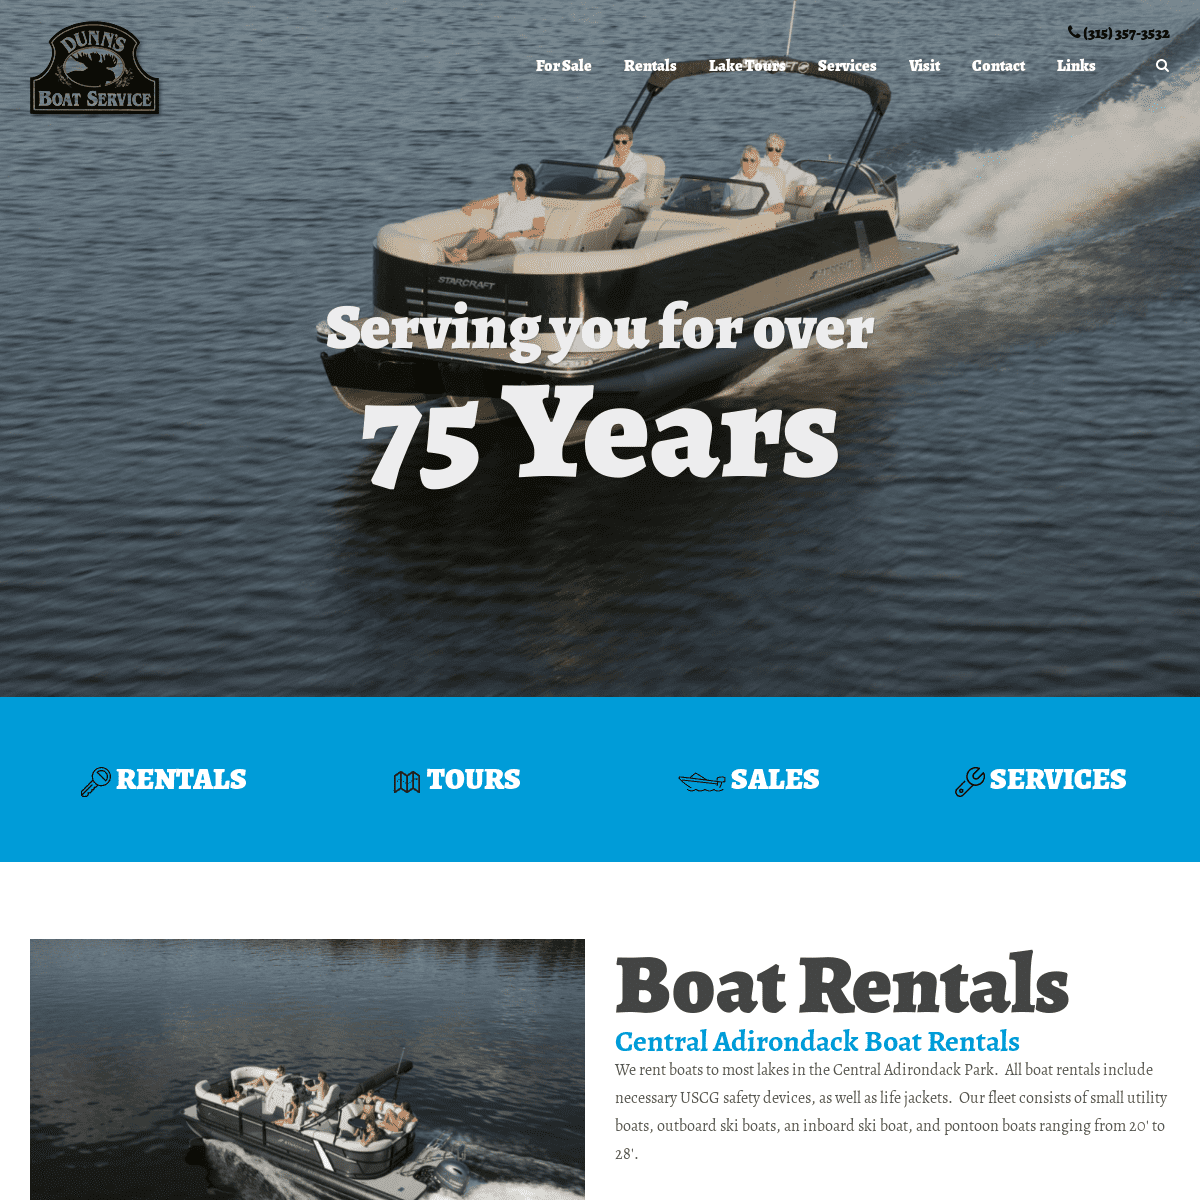 A complete backup of dunnsboats.com